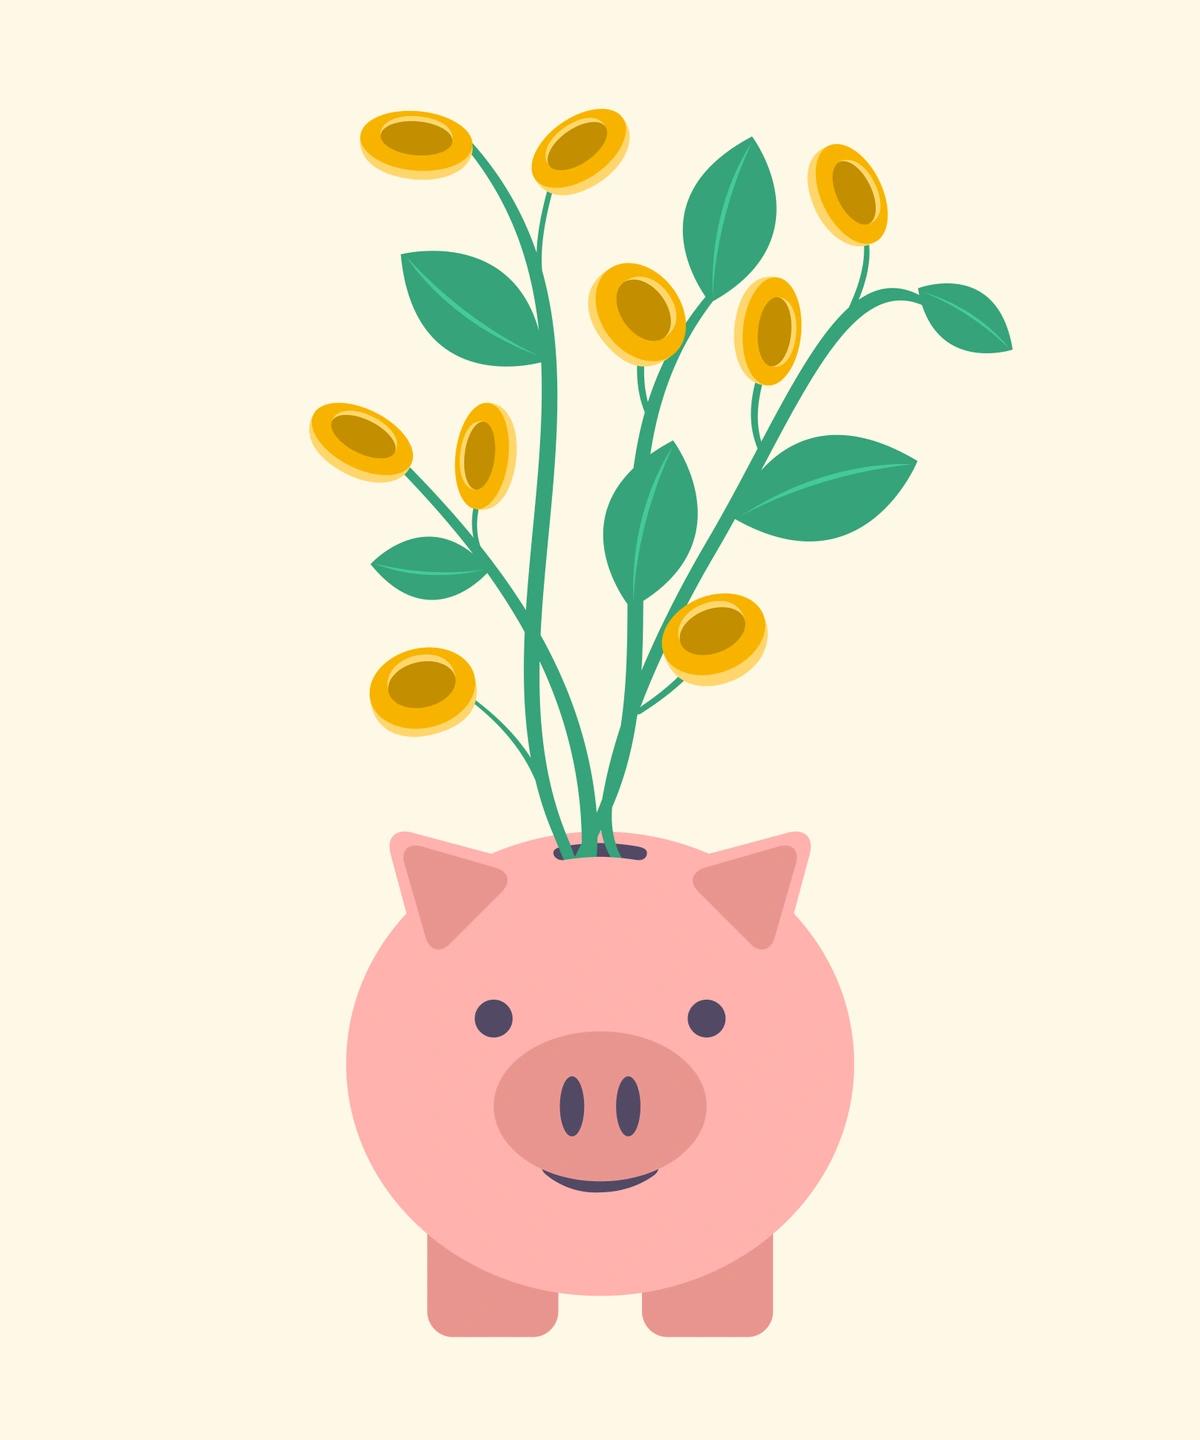 Illustration of a piggy bank with a money tree growing out of it